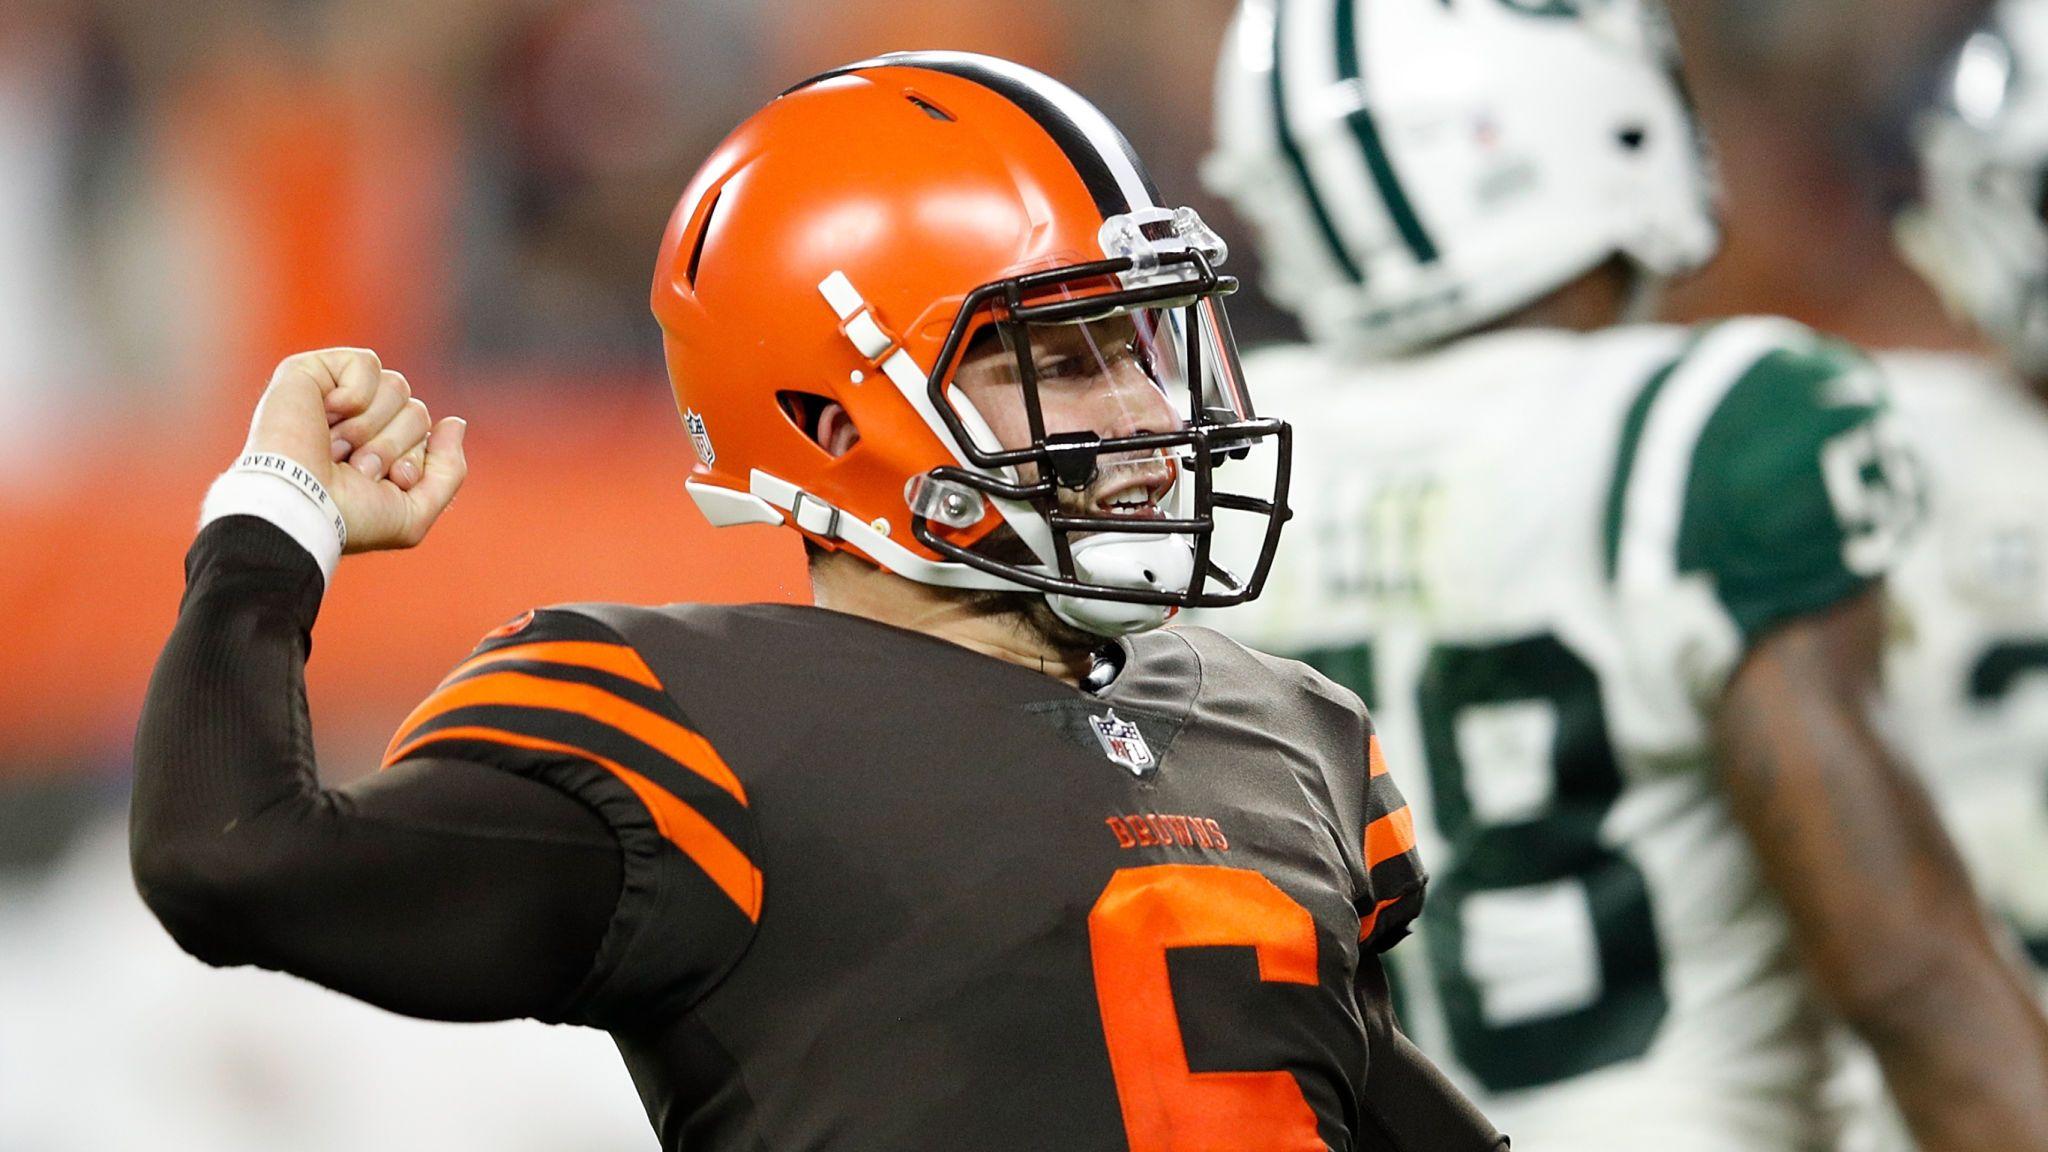 New York Jets 17 21 Cleveland Browns: Baker Mayfield Stars As Browns